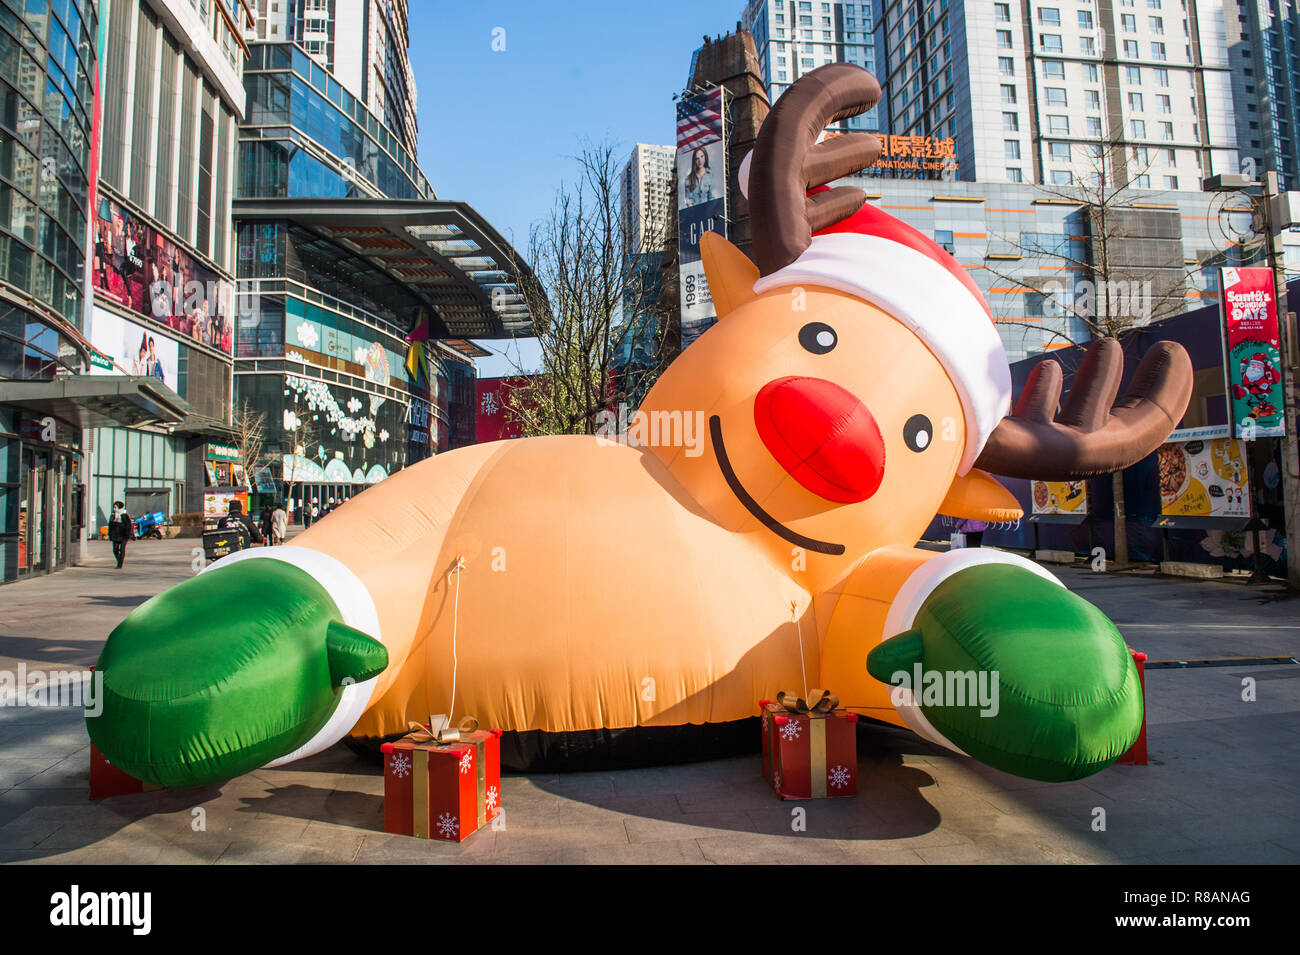 December 14, 2018 - Shenyan, Shenyan, China - Shenyang, CHINA-A 5-meter-tall air structure of Santa Claus can be seen on street in Shenyang, northeast ChinaÃ¢â‚¬â„¢s Liaoning Province, marking the upcoming Christmas Day. (Credit Image: © SIPA Asia via ZUMA Wire) Stock Photo